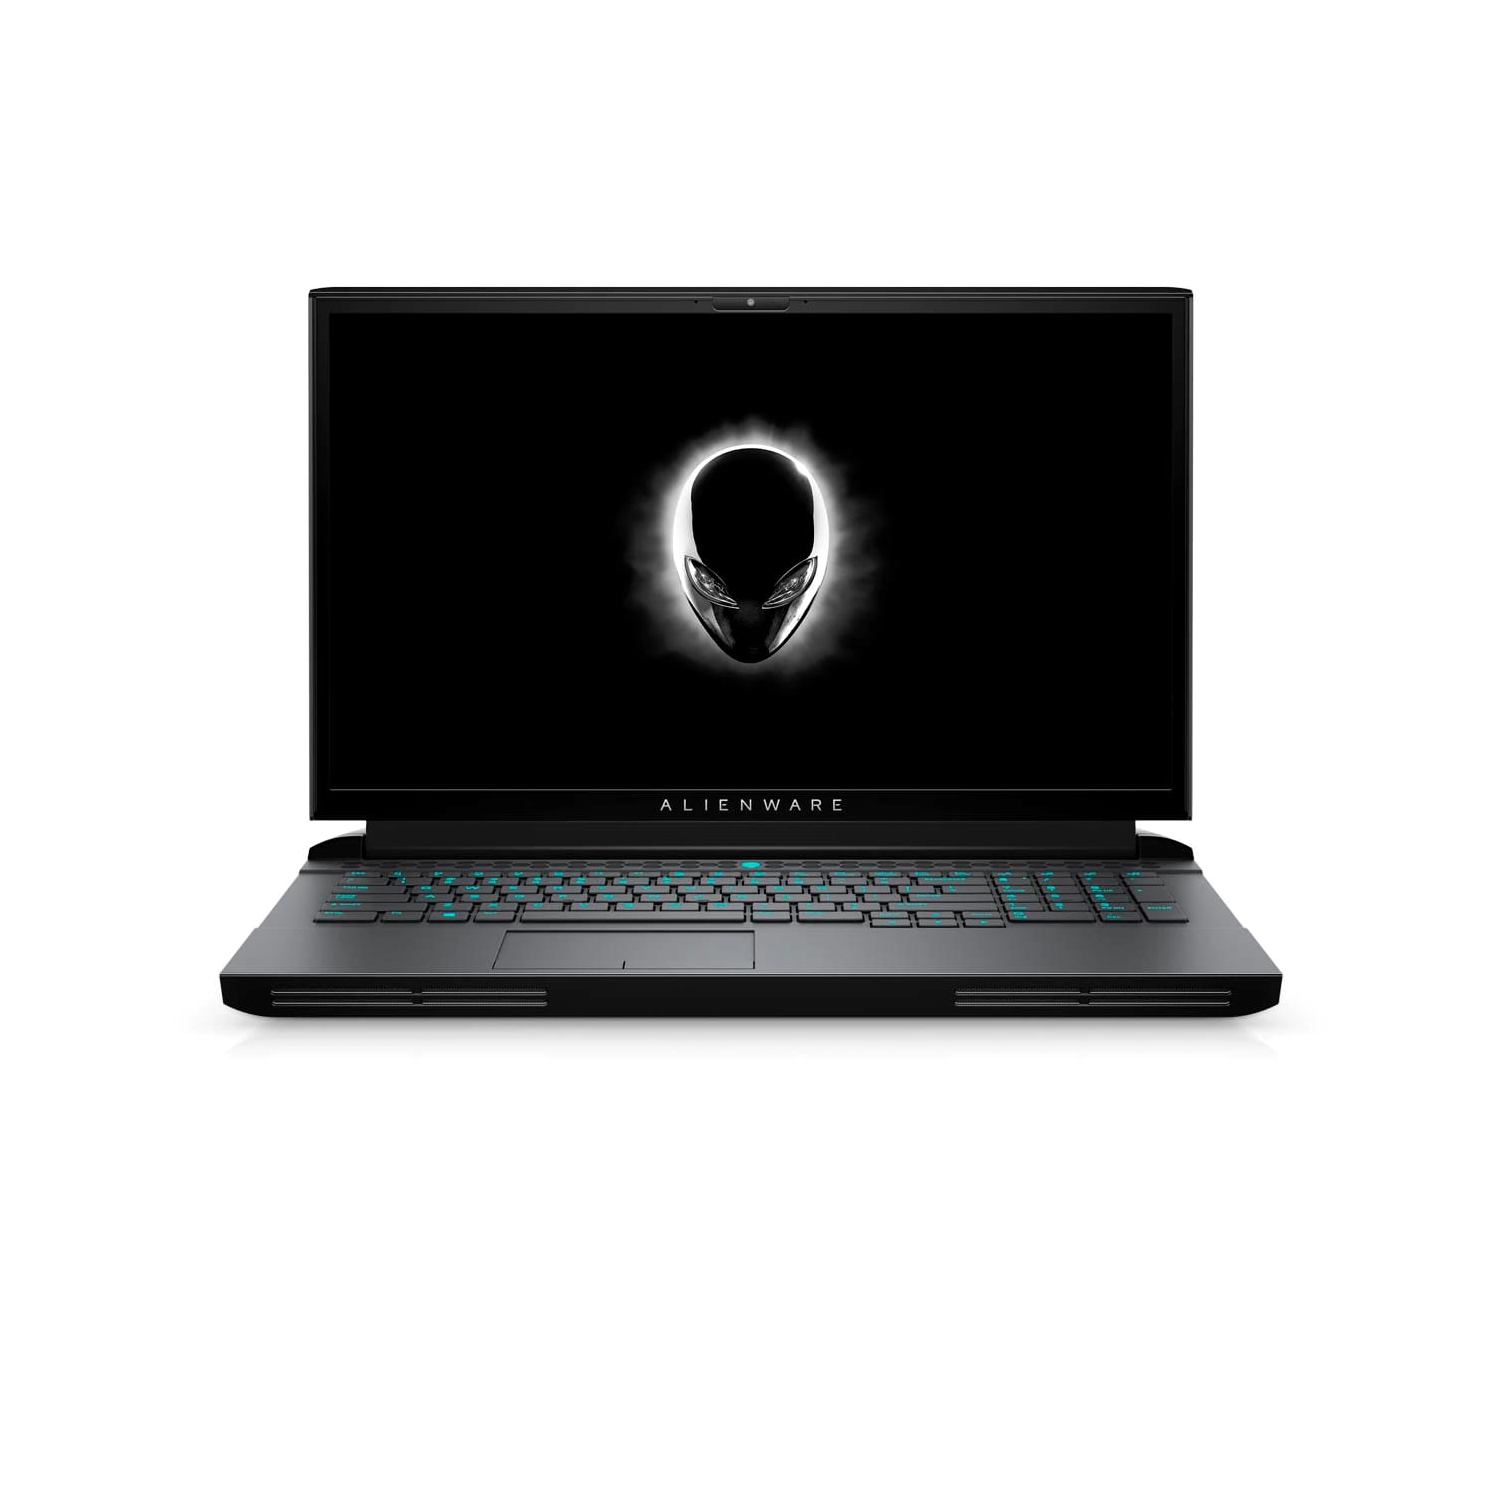 Refurbished (Excellent) - Dell Alienware 17 51m R2 Gaming Laptop (2020), 17.3" FHD, Core i7, 512GB SSD, 32GB RAM, RTX 2060, 8 Cores @ 4.8 GHz, 10th Gen CPU Certified